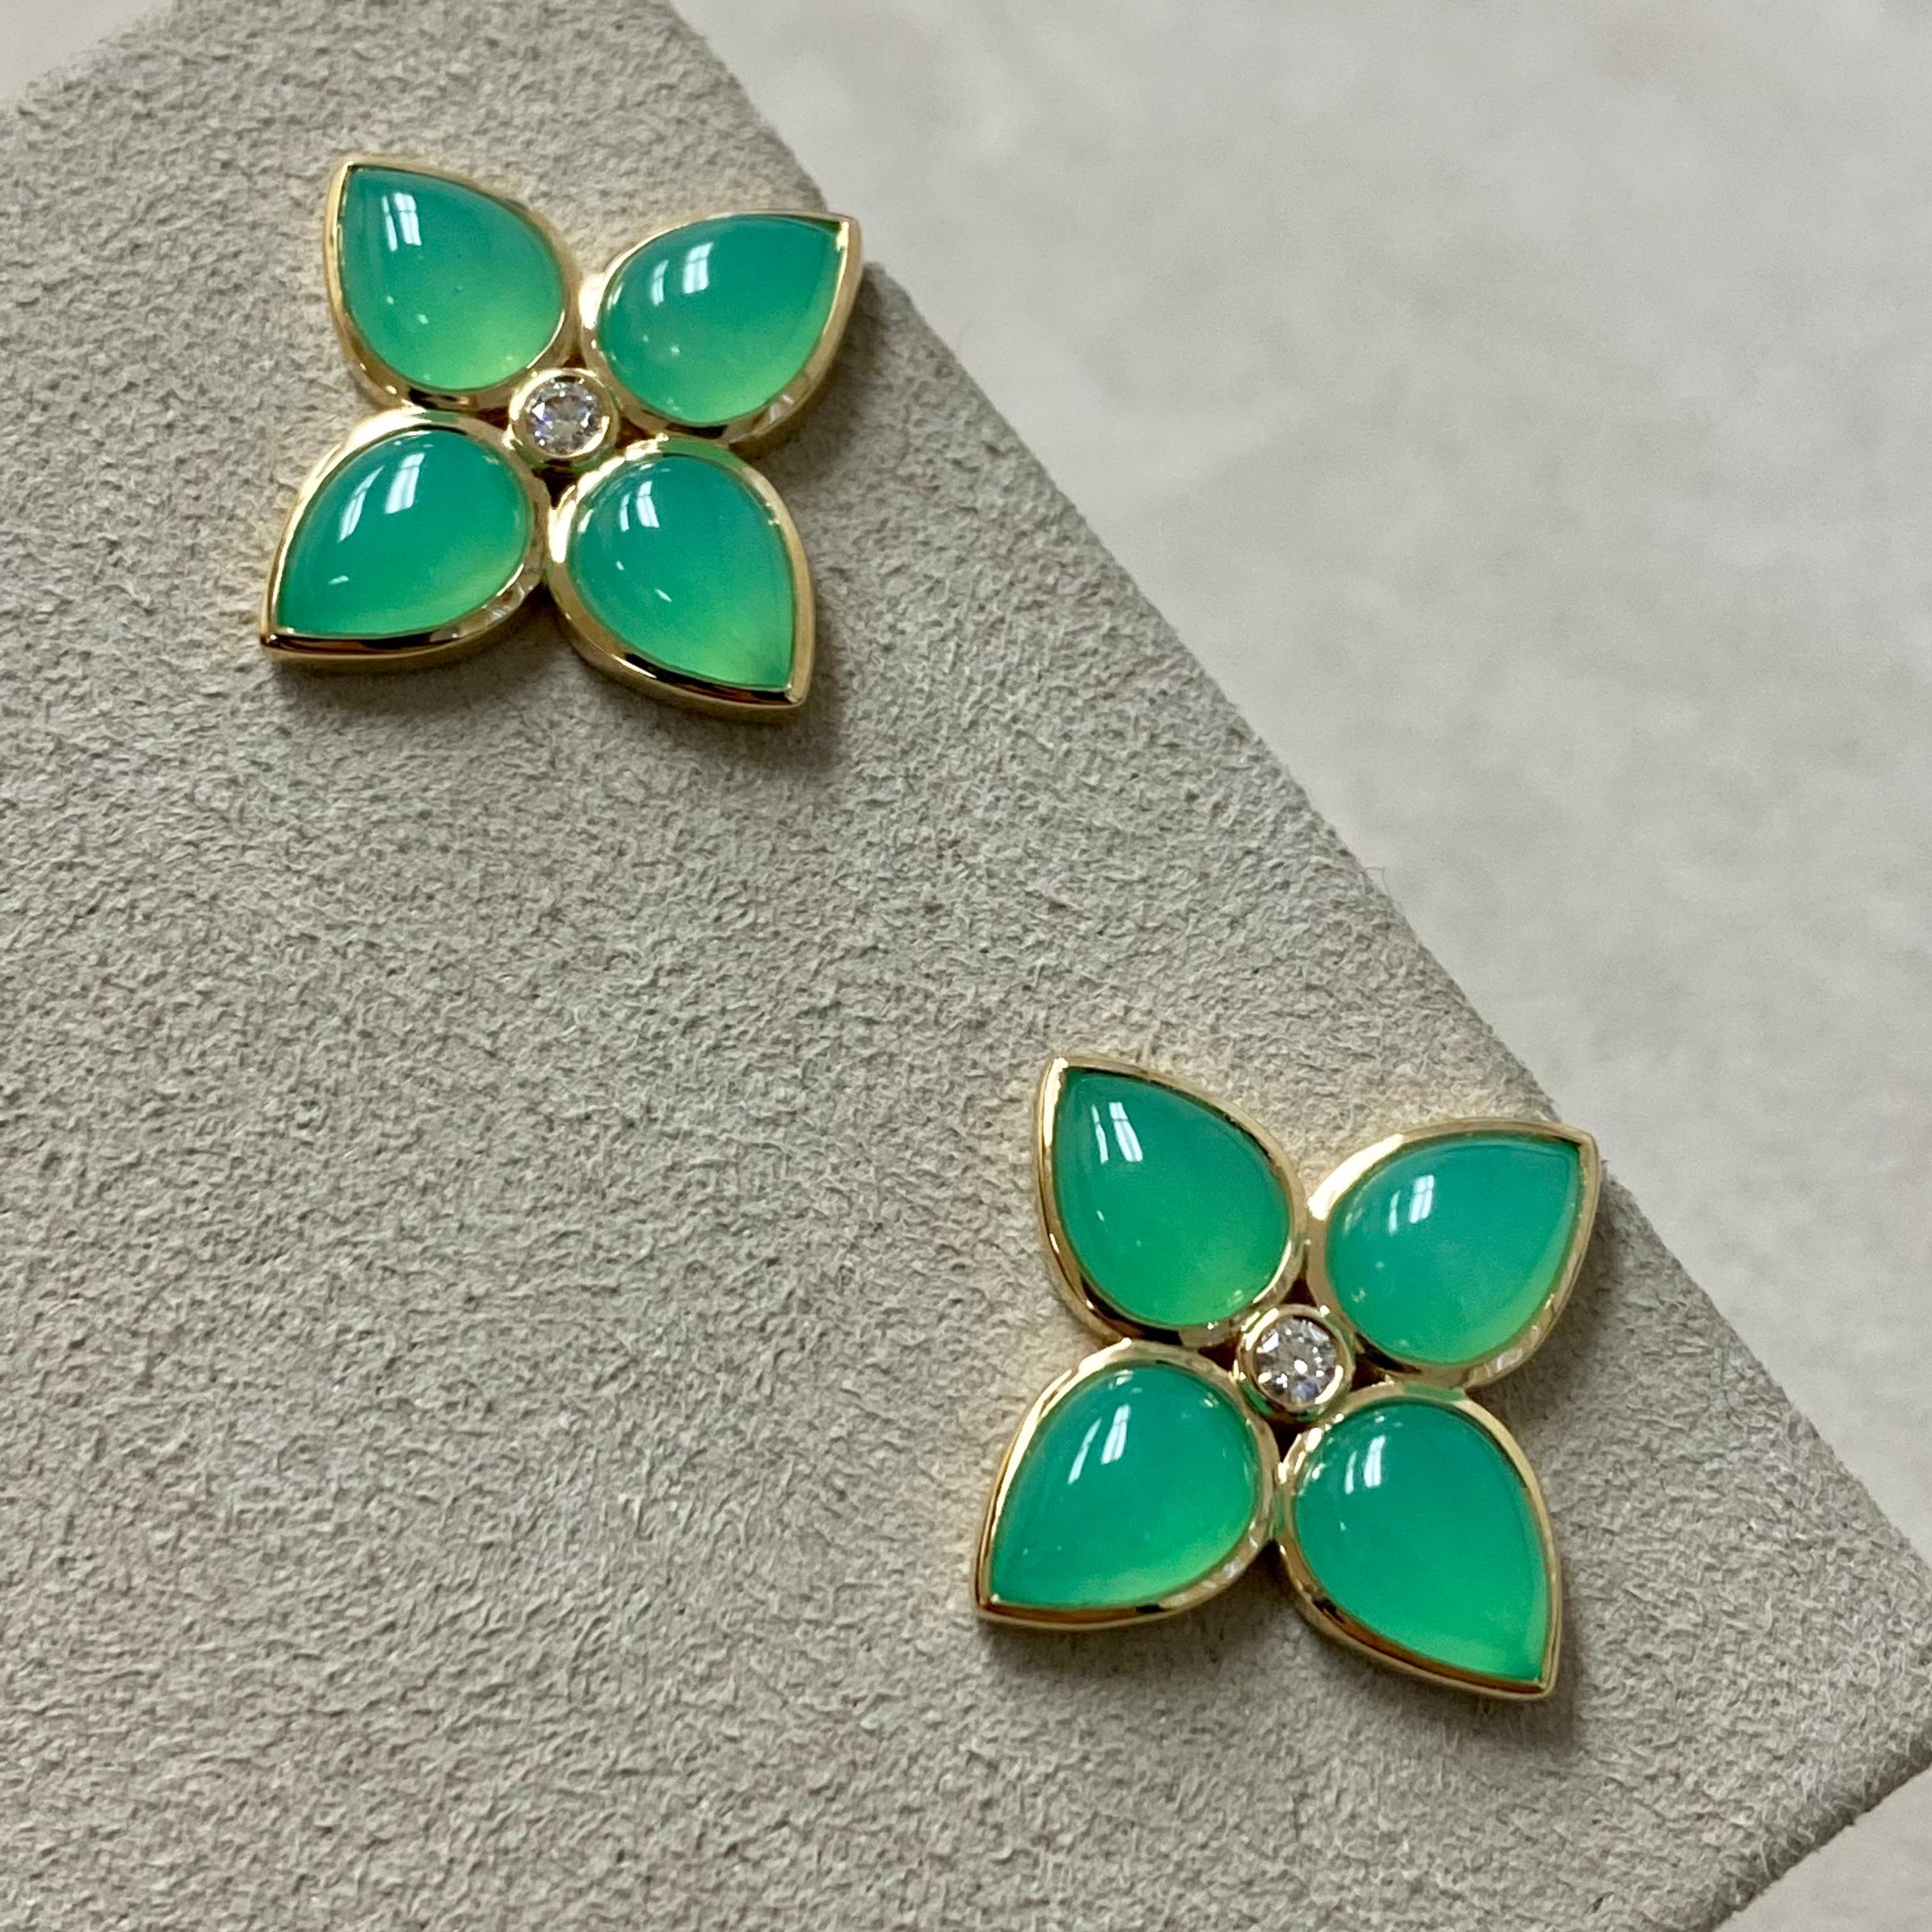 Created in 18 karat yellow gold
Chrysoprase 8 carats approx.
Champagne diamonds 0.09 carat approx.
Post backs for pierced ears
Limited edition


About the Designers ~ Dharmesh & Namrata

Drawing inspiration from little things, Dharmesh & Namrata